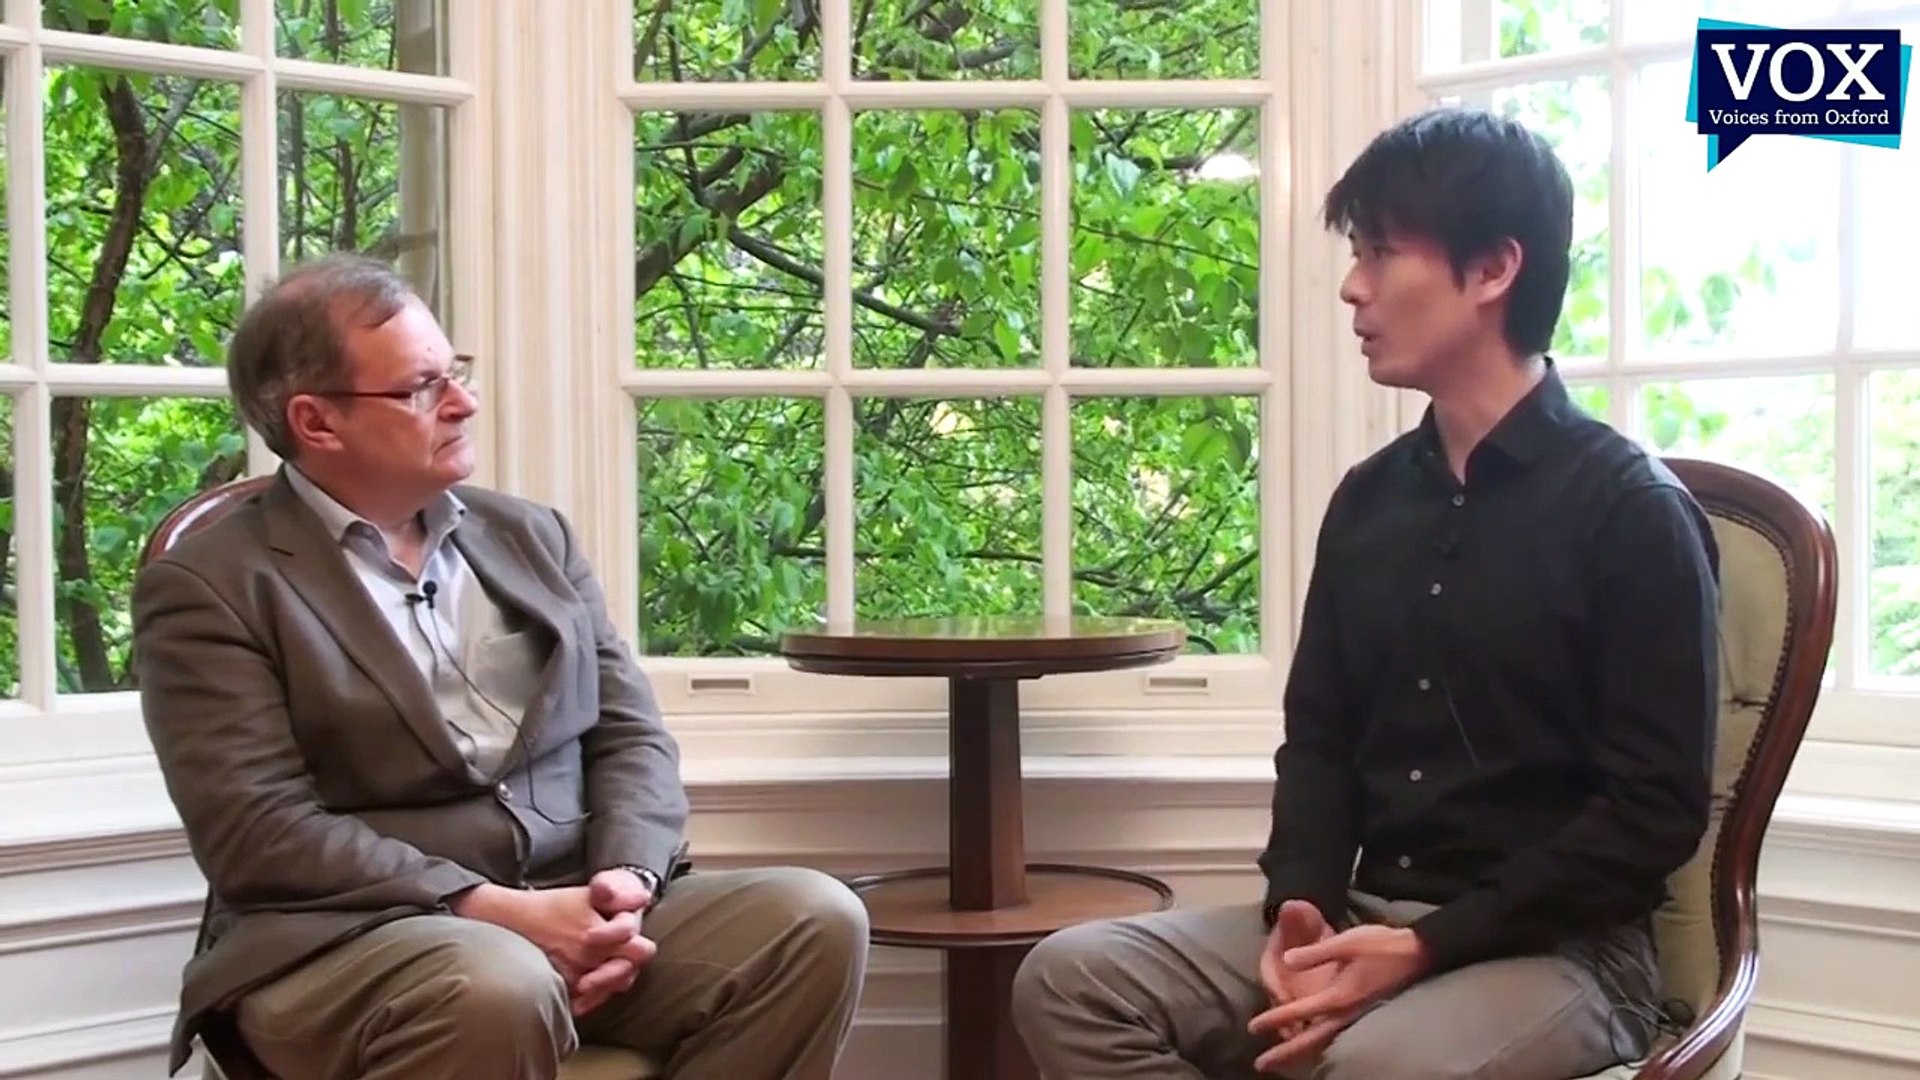 A Pianist and Physicist in Conversation